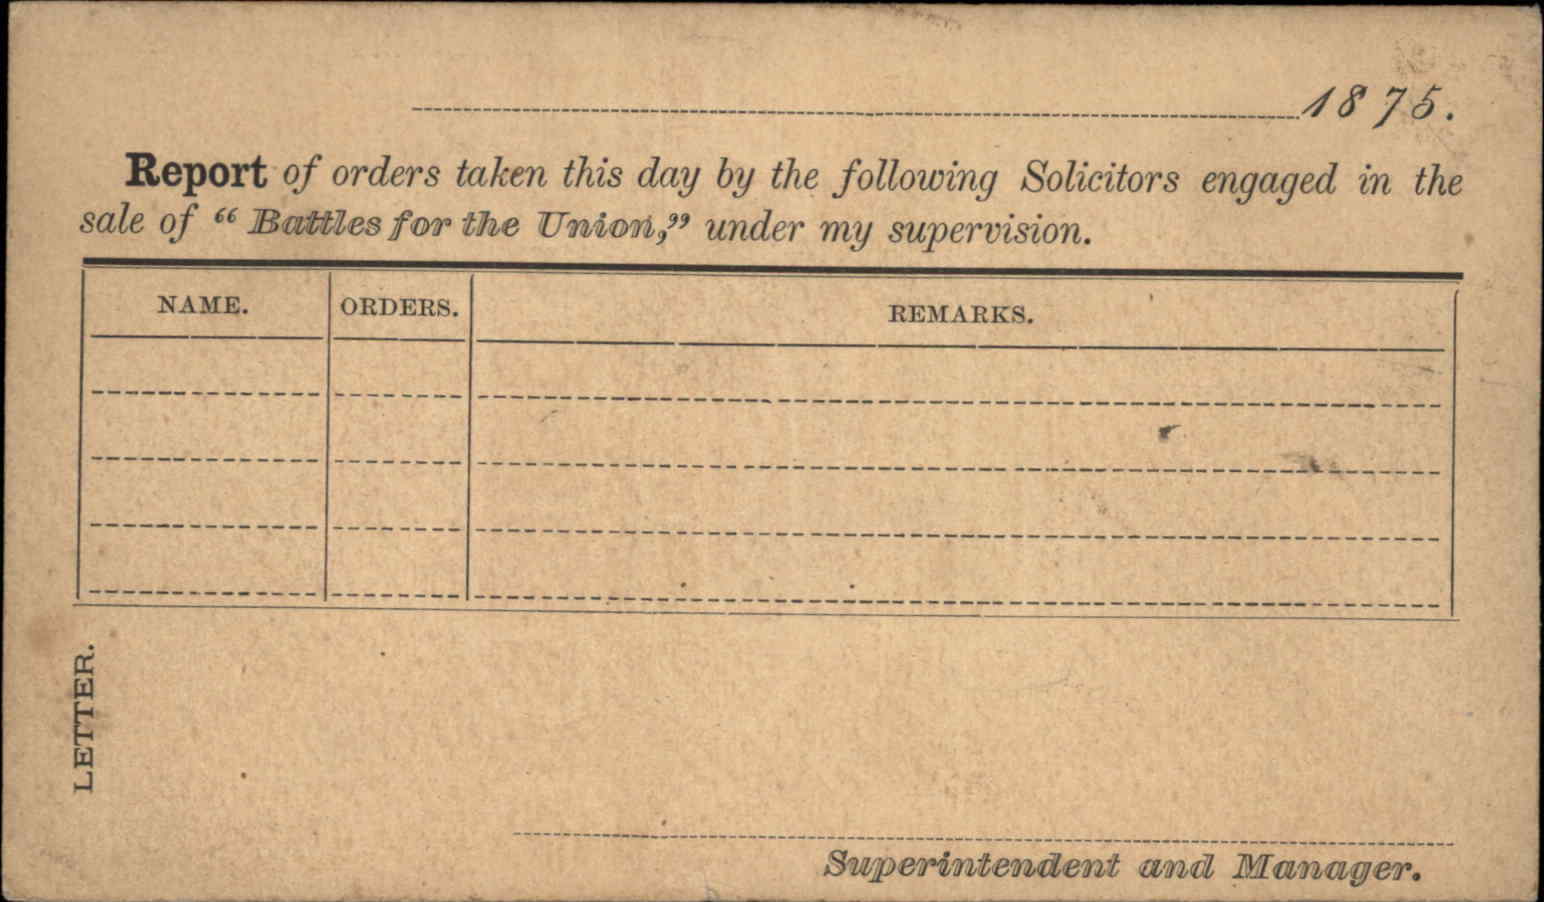 1875 Postal Card BATTLES FOR THE UNION Report Solicitors Postal Card UX1